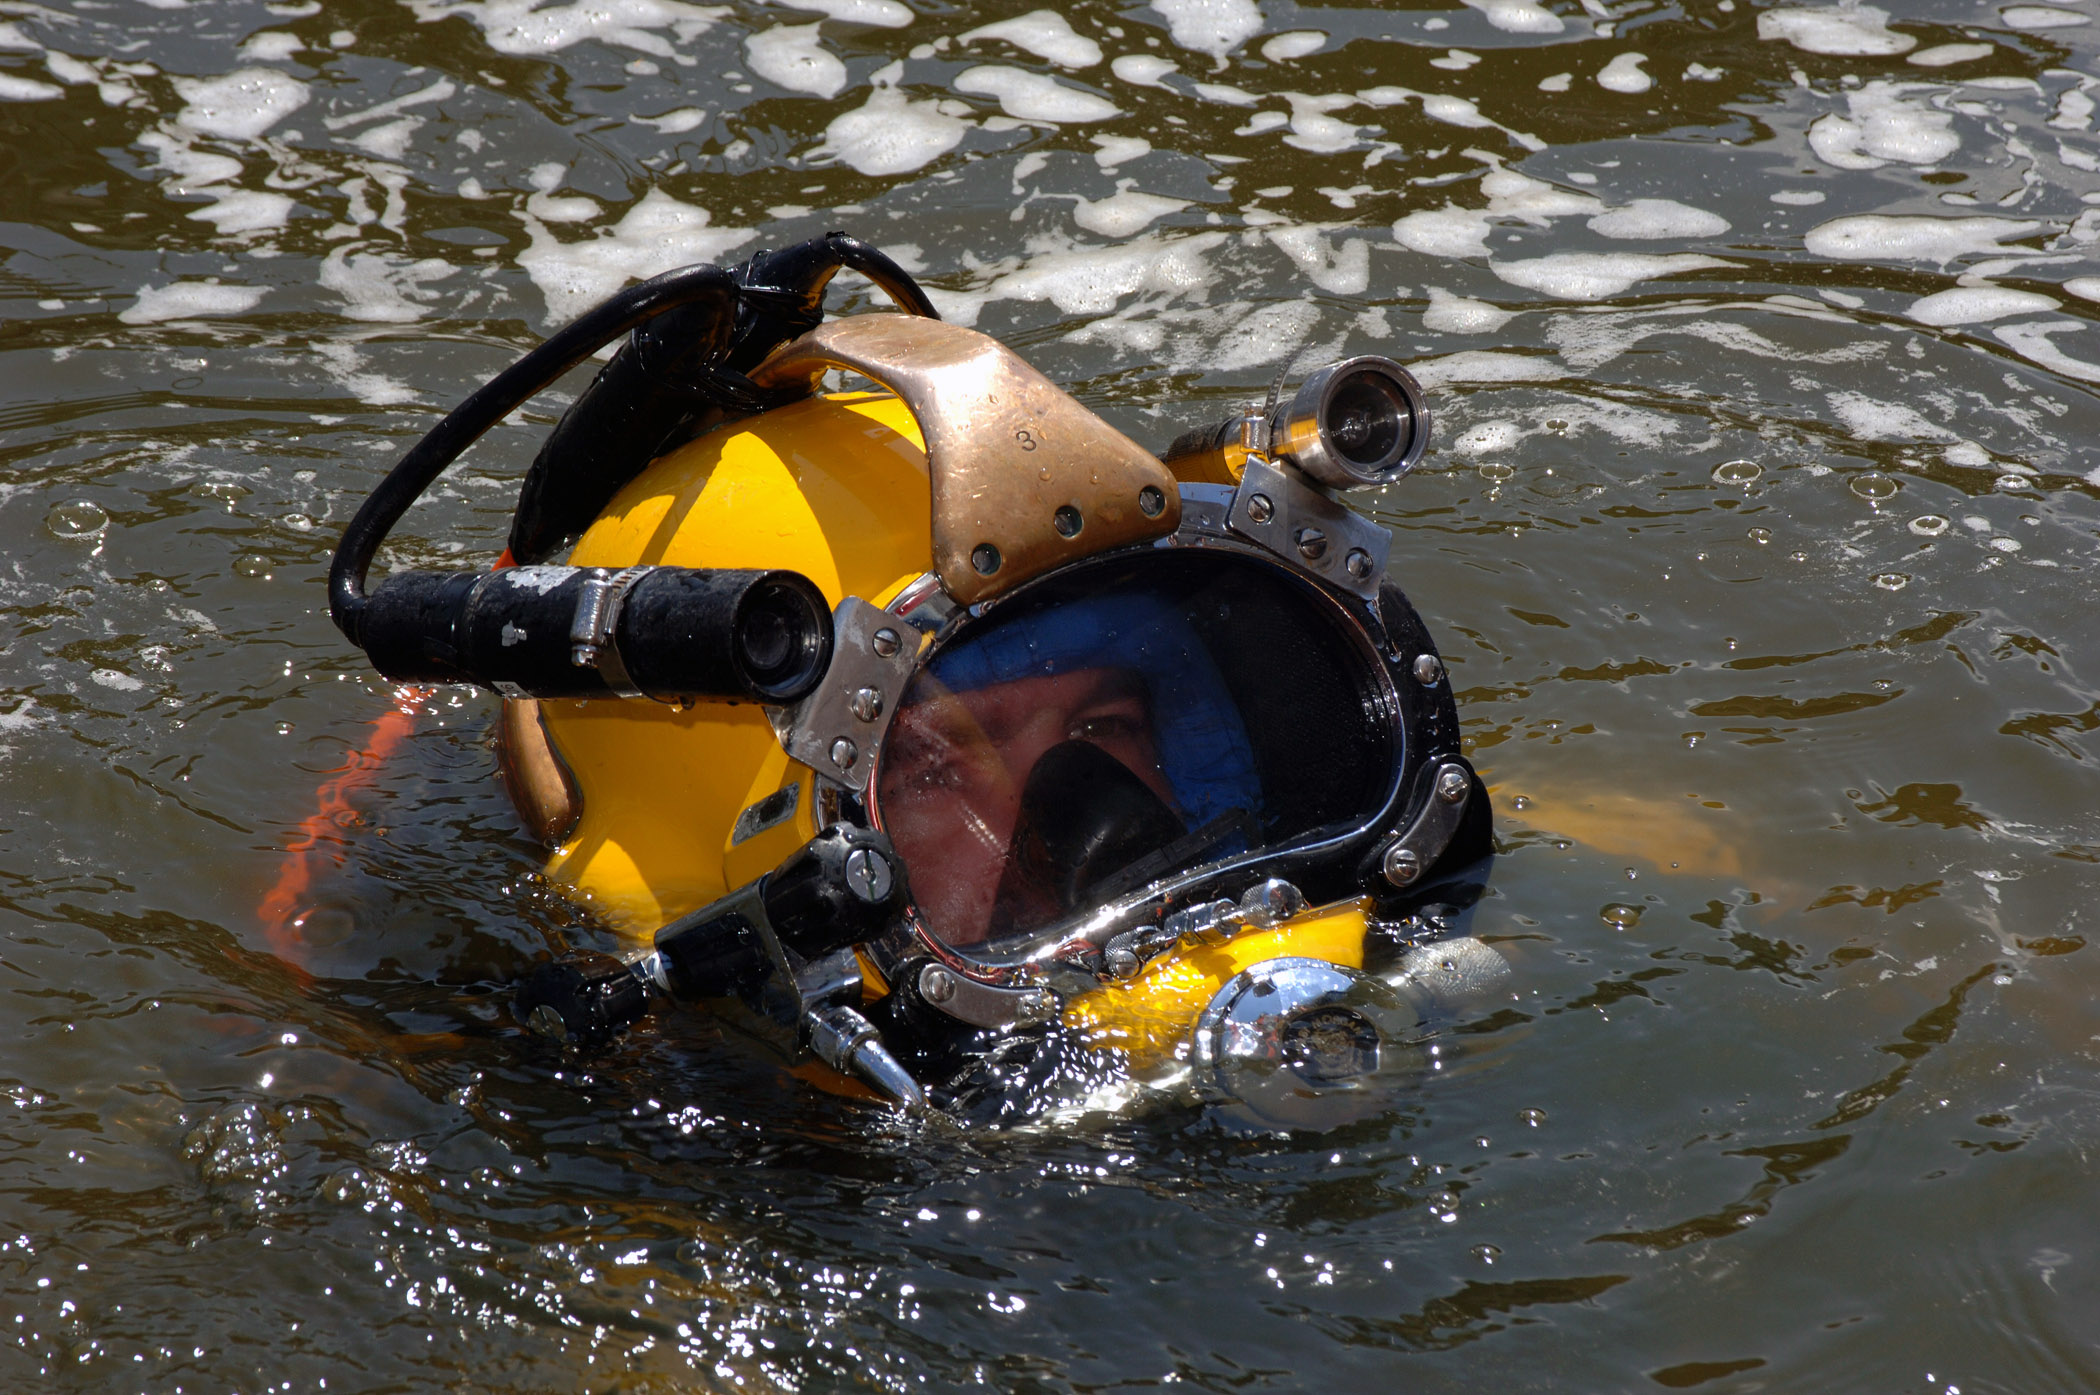 US Navy 070811-N-3093M-009 Chief Navy Diver Scott Maynard attached to Mobile Diving and Salvage Unit (MDSU) 2 from Naval Amphibious Base Little Creek, Va., prepares to leave the surface on a salvage dive in the Mississippi Rive